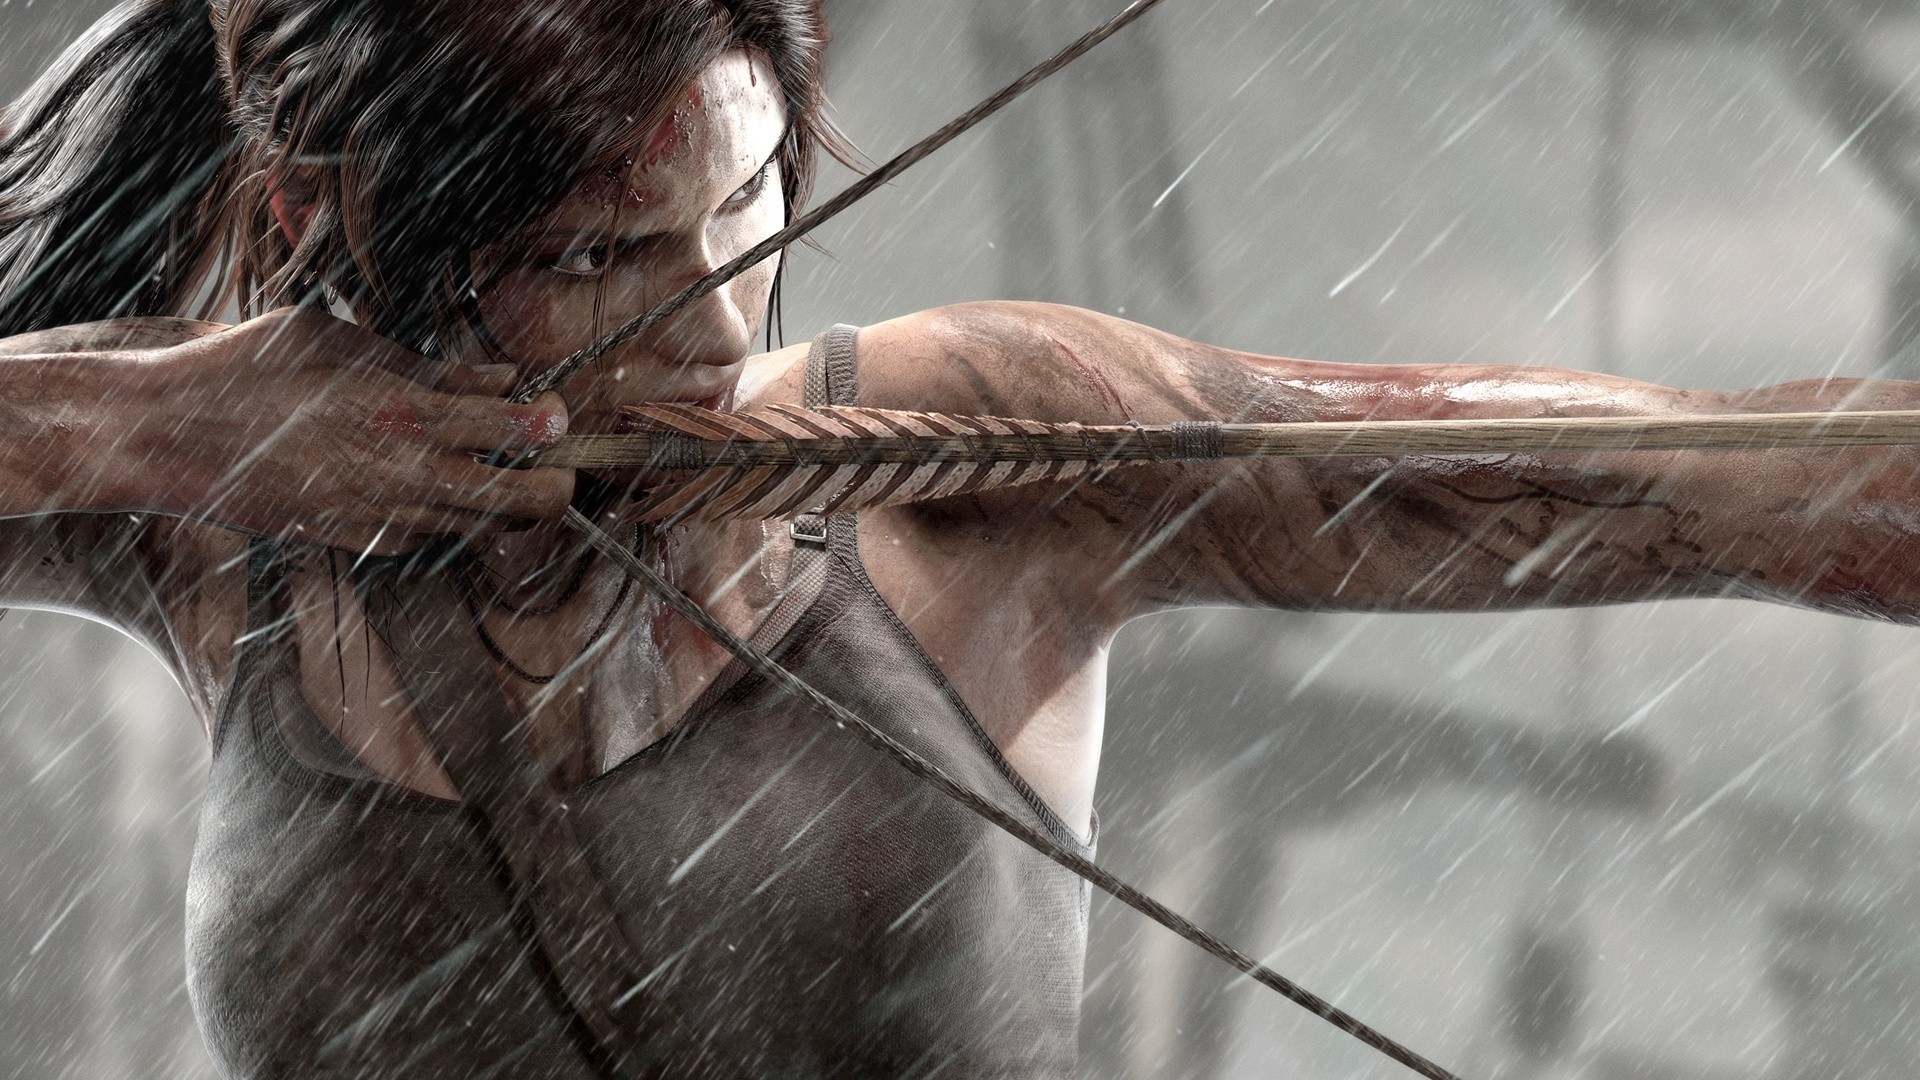 General 1920x1080 bow and arrow women rain wounds injured Lara Croft (Tomb Raider) video game characters